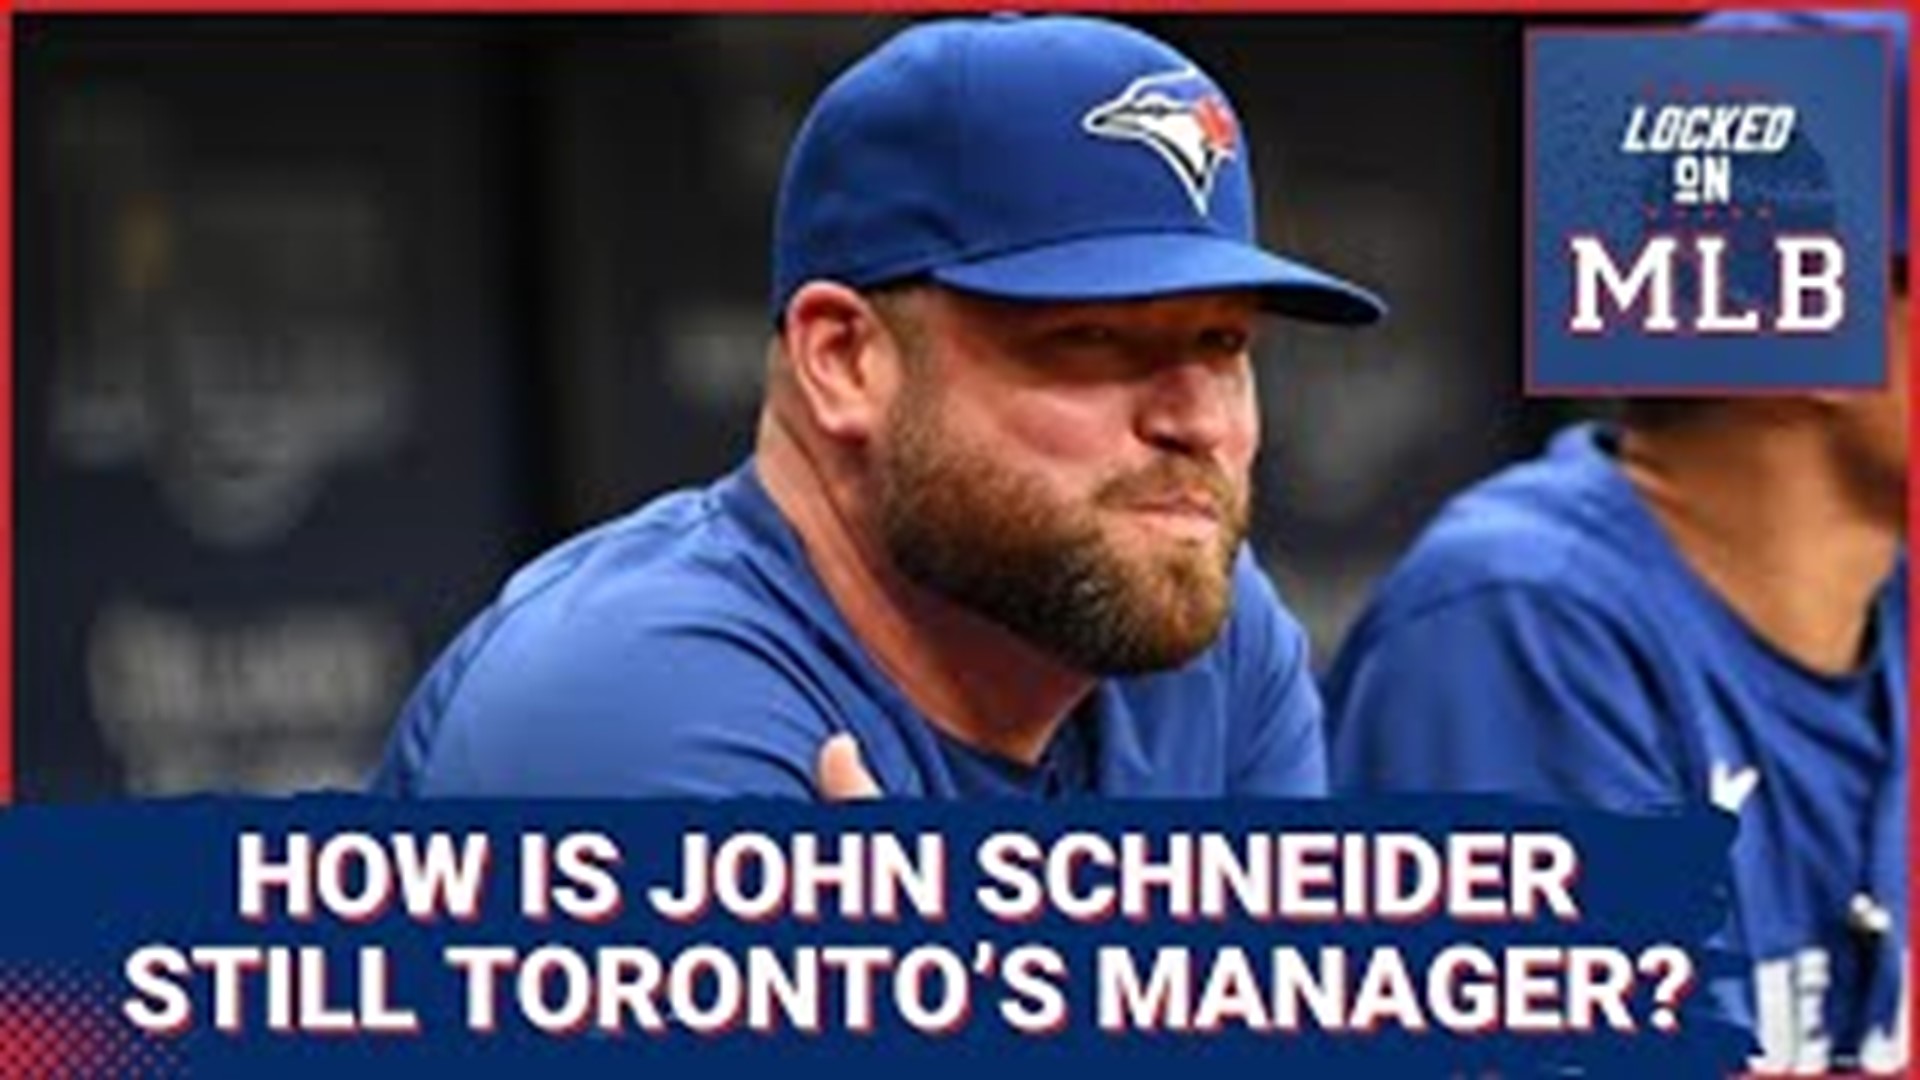 Nearly a year ago, I felt the Blue Jays needed to make a change with their manager. Now here we are and everything I said back then remains valid now.